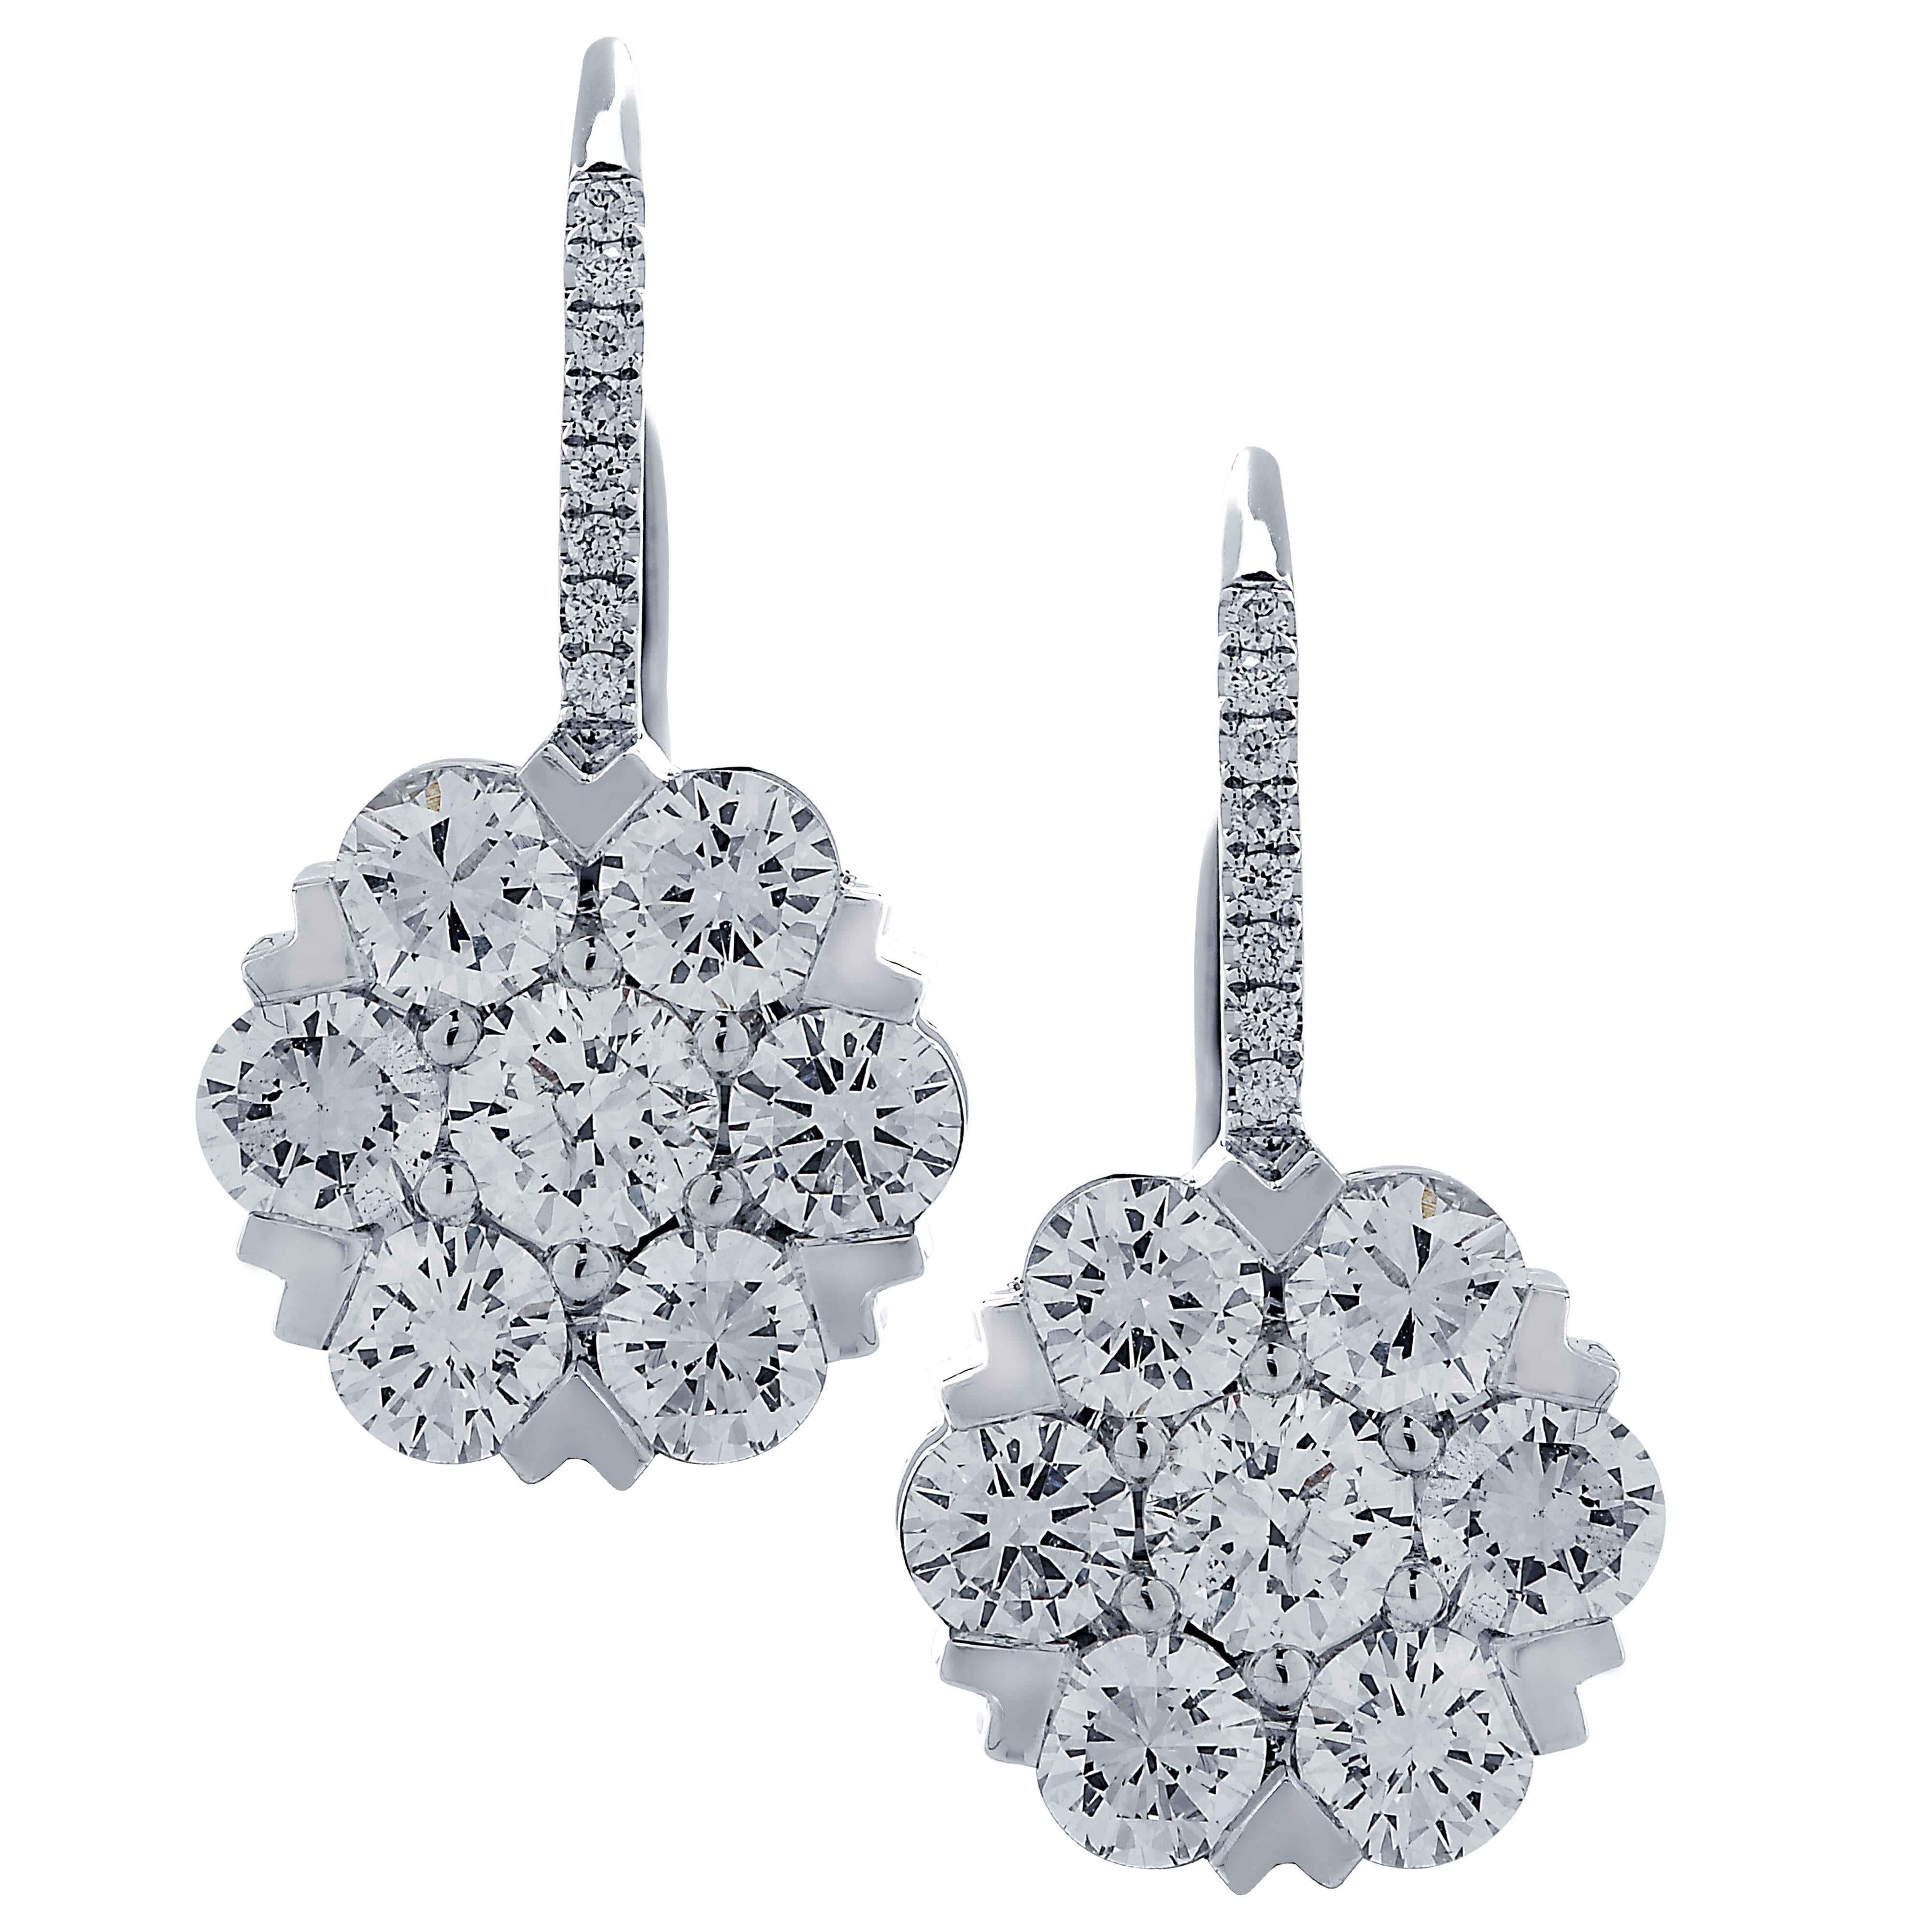 Spectacular Vivid Diamonds dangle earrings finely crafted in 18 karat white gold featuring 30 round brilliant cut diamonds weighing 2.87 carats total G color VS-SI clarity arranged in a mesmerizing flower design that captures the unparalleled beauty